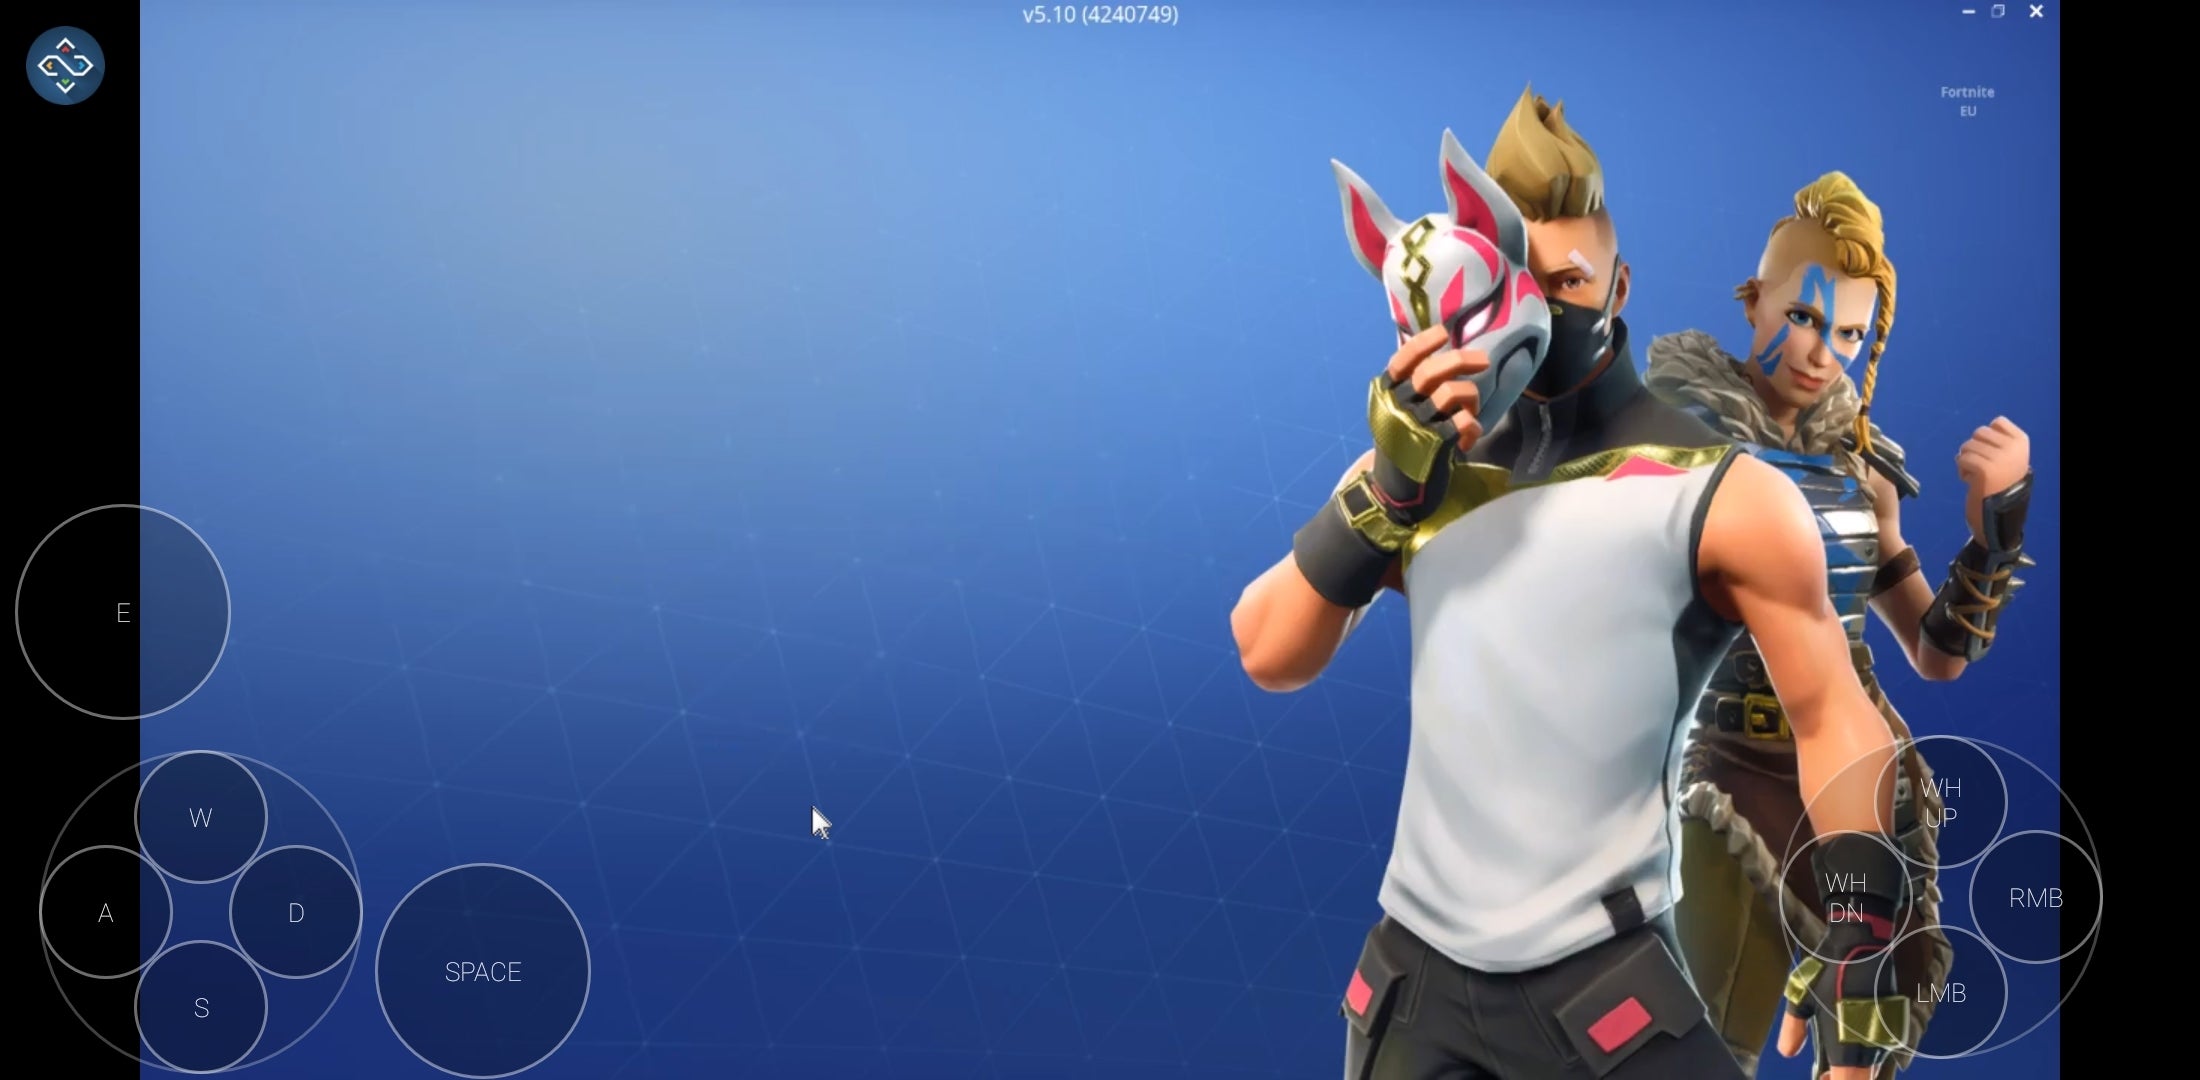 How to play Fortnite on your Android device right now for free